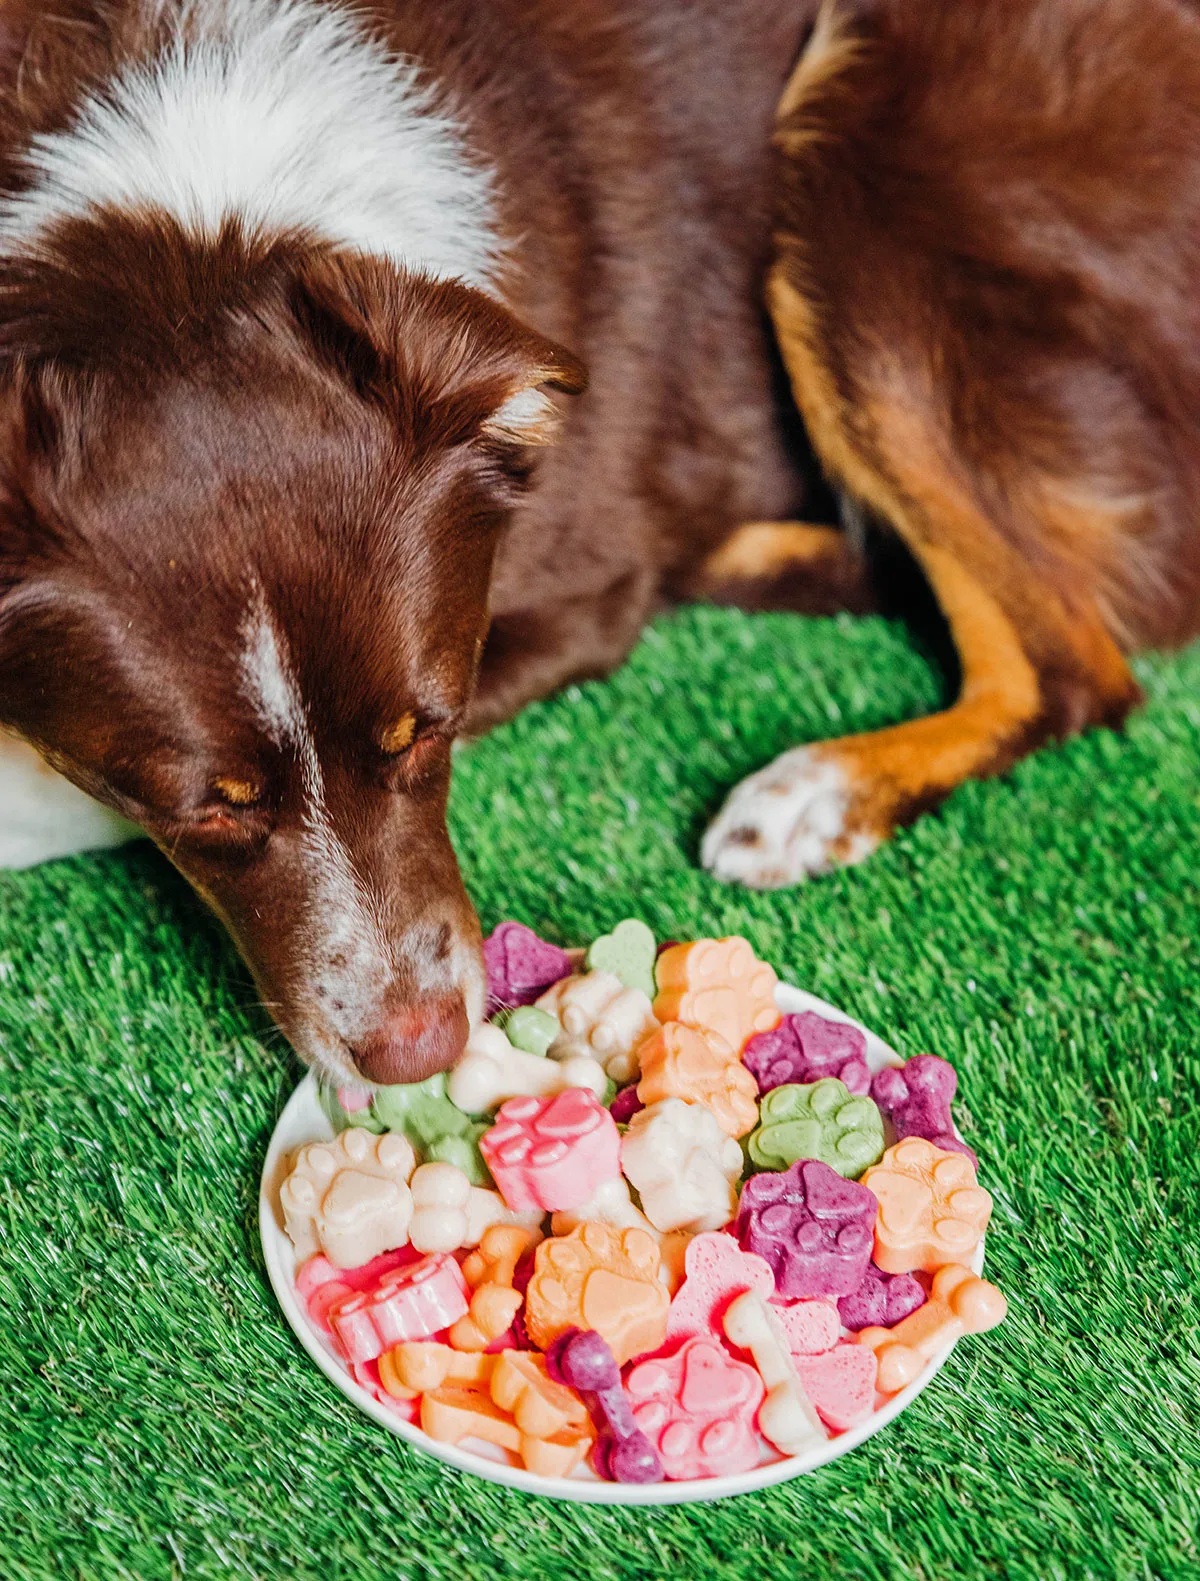 A dog licking a bowl of multi colored frozen dog treats.